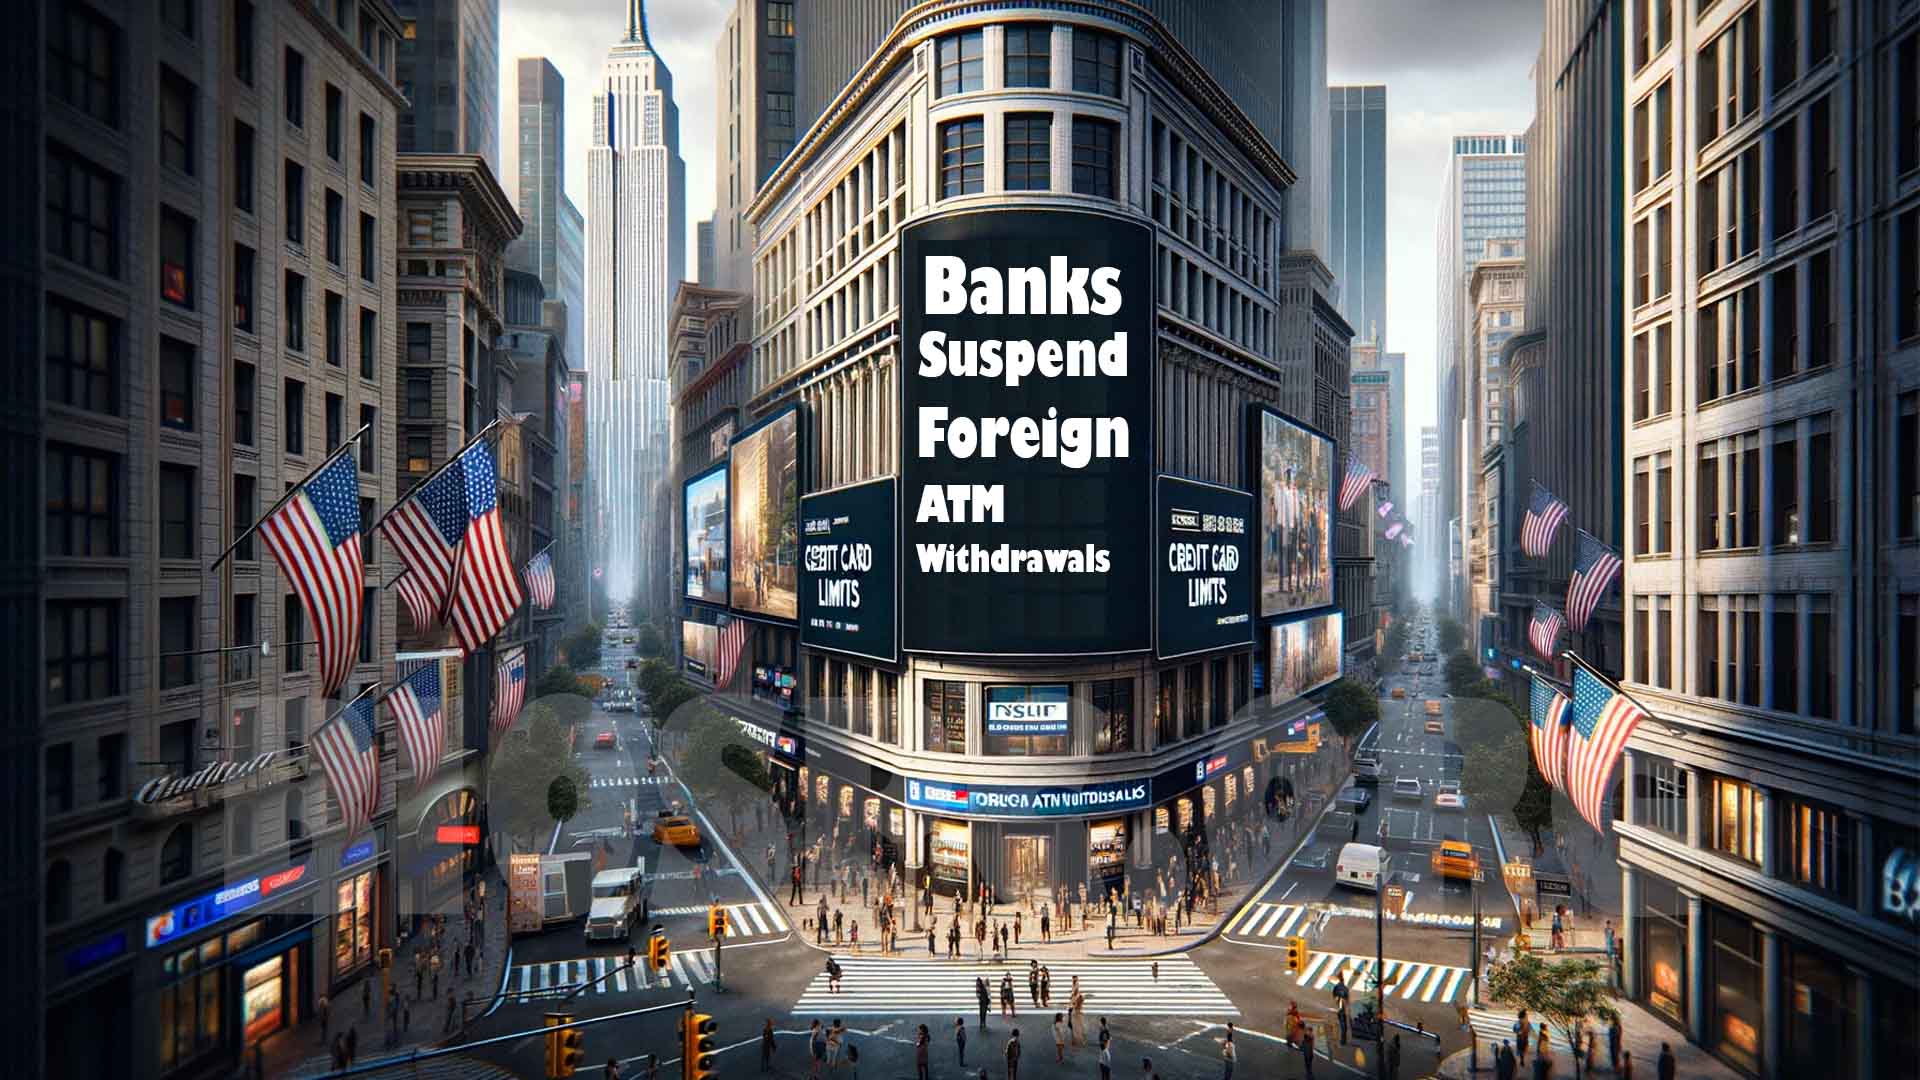 Banks Suspend Foreign ATM Withdrawals